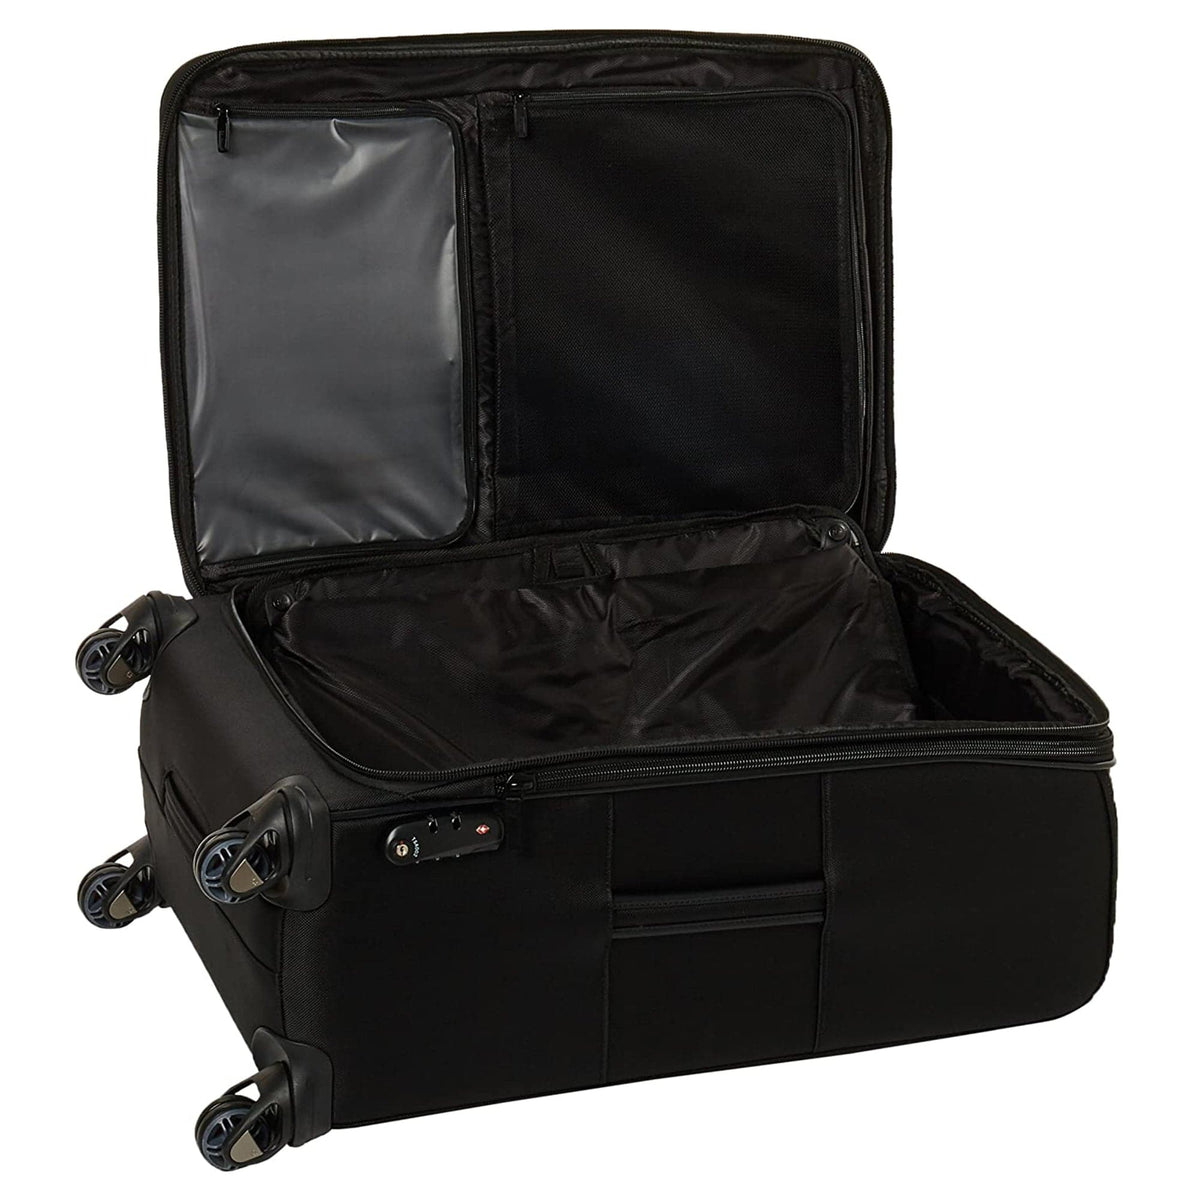 Samsonite Pro 4 Deluxe 25" Expandable Spinner Luggage